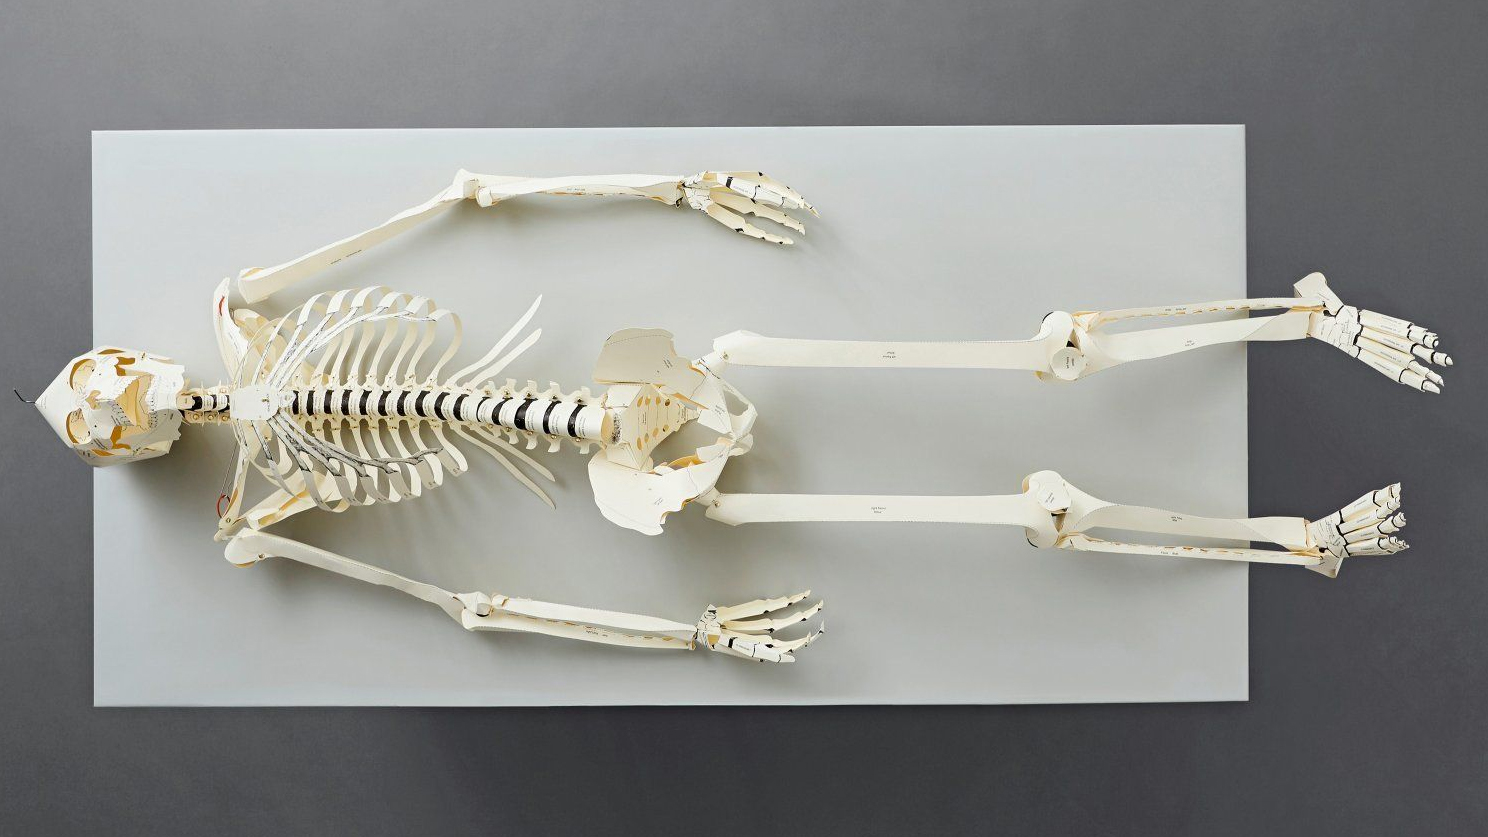 A Textbook That Turns Into A Lifesize Paper Skeleton Should Be Standard At Med Schools